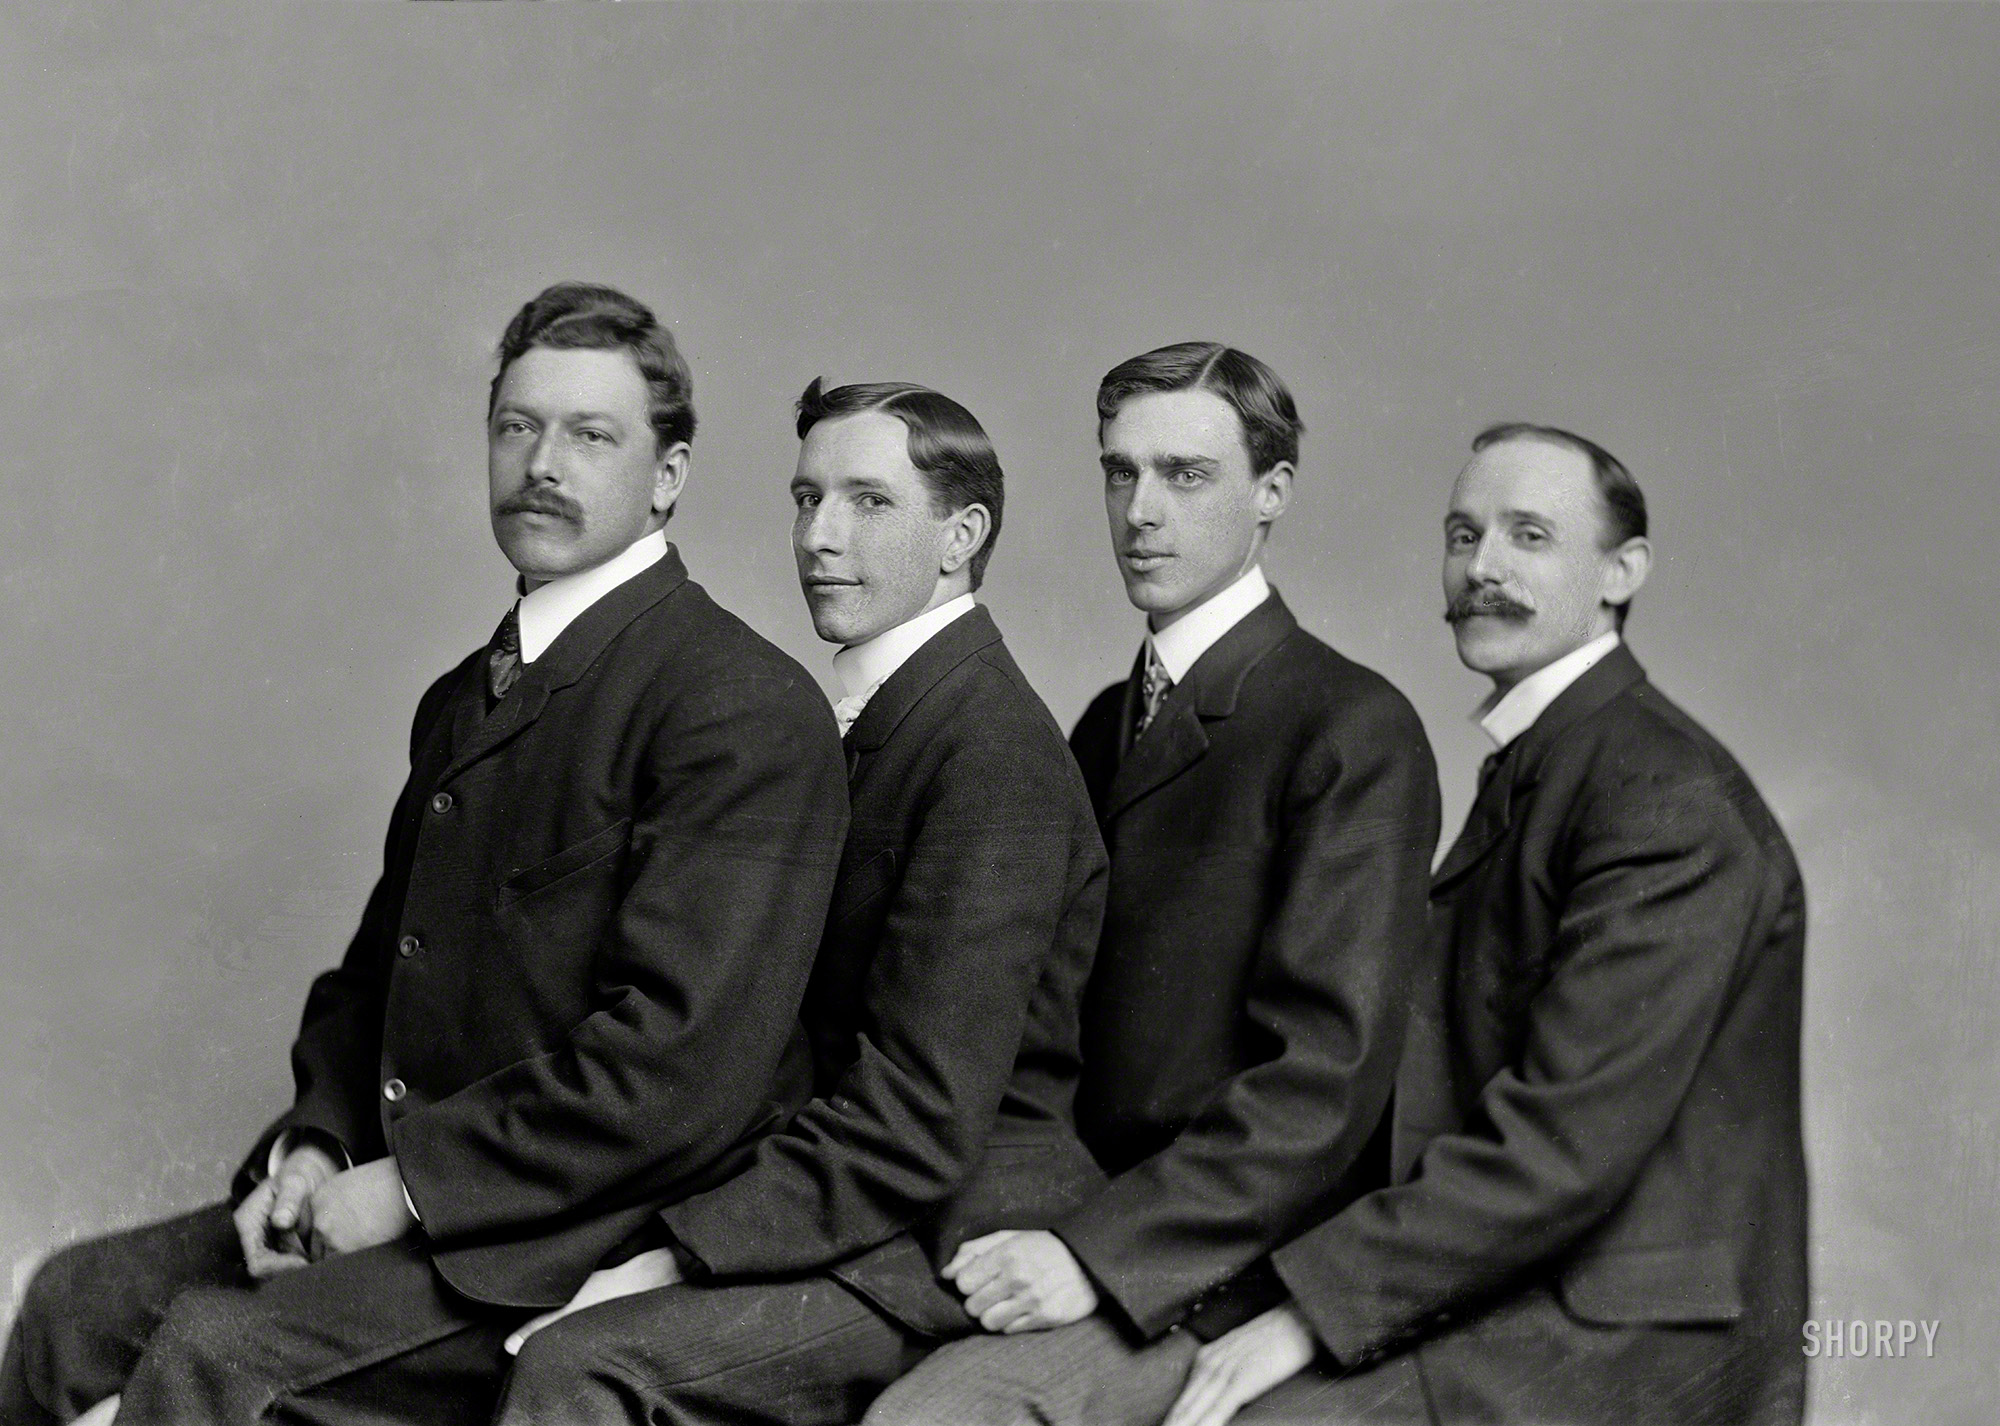 Washington, D.C., circa 1900. "Unidentified group." Who's up for another chorus of "Sweet Adeline"? C.M. Bell portrait studio glass negative. View full size.